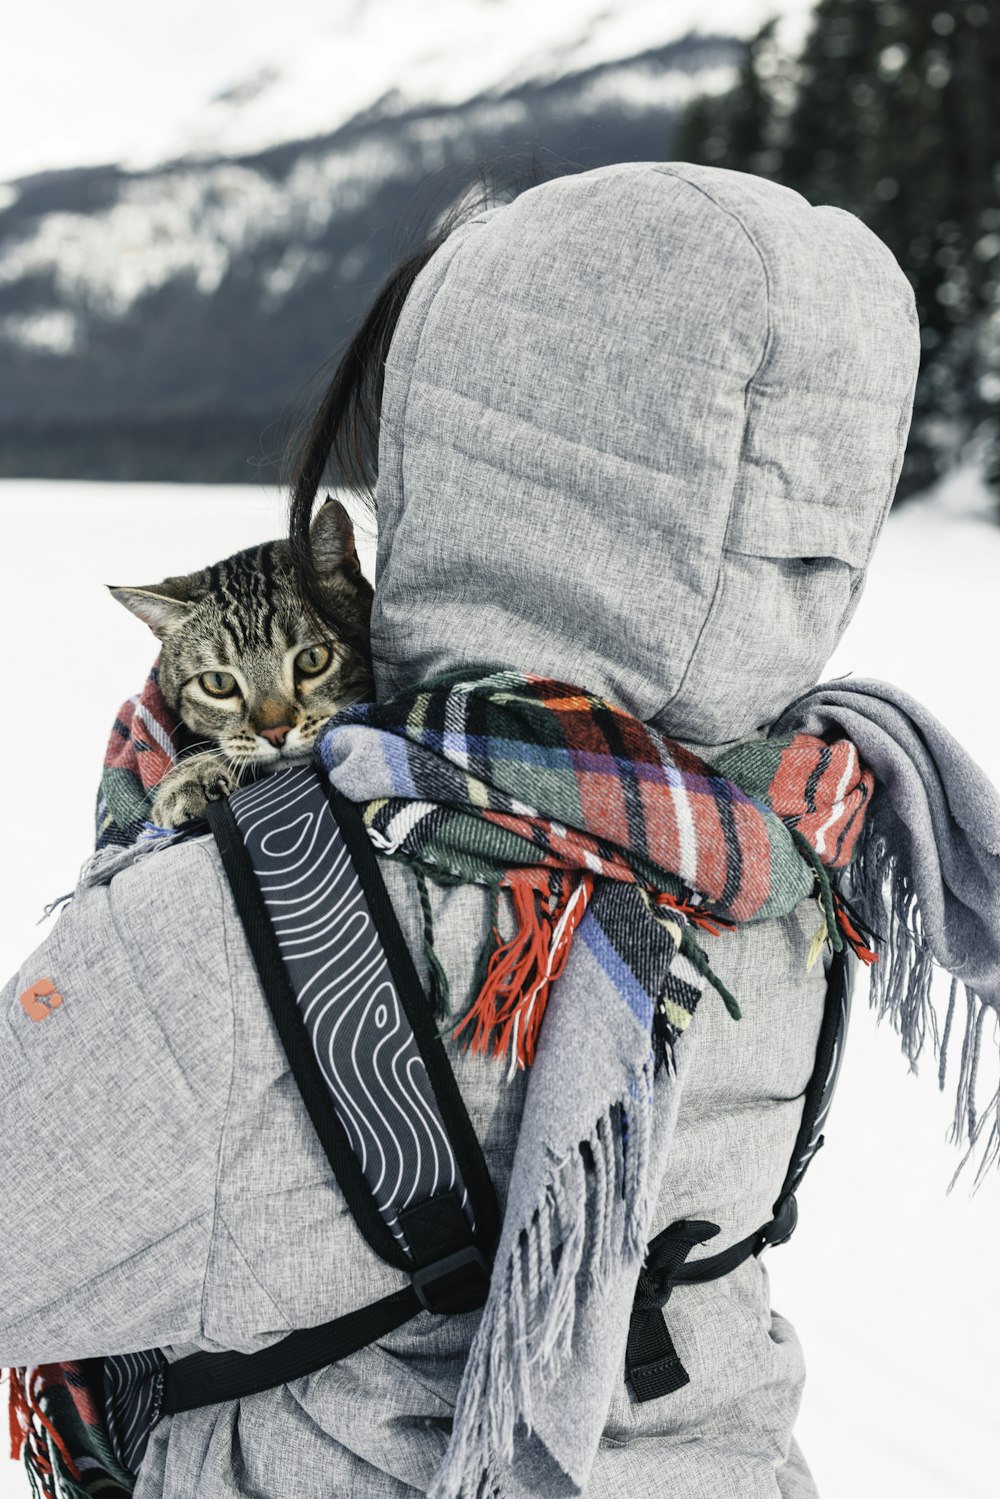 a cat sitting on top of a backpack in the snow